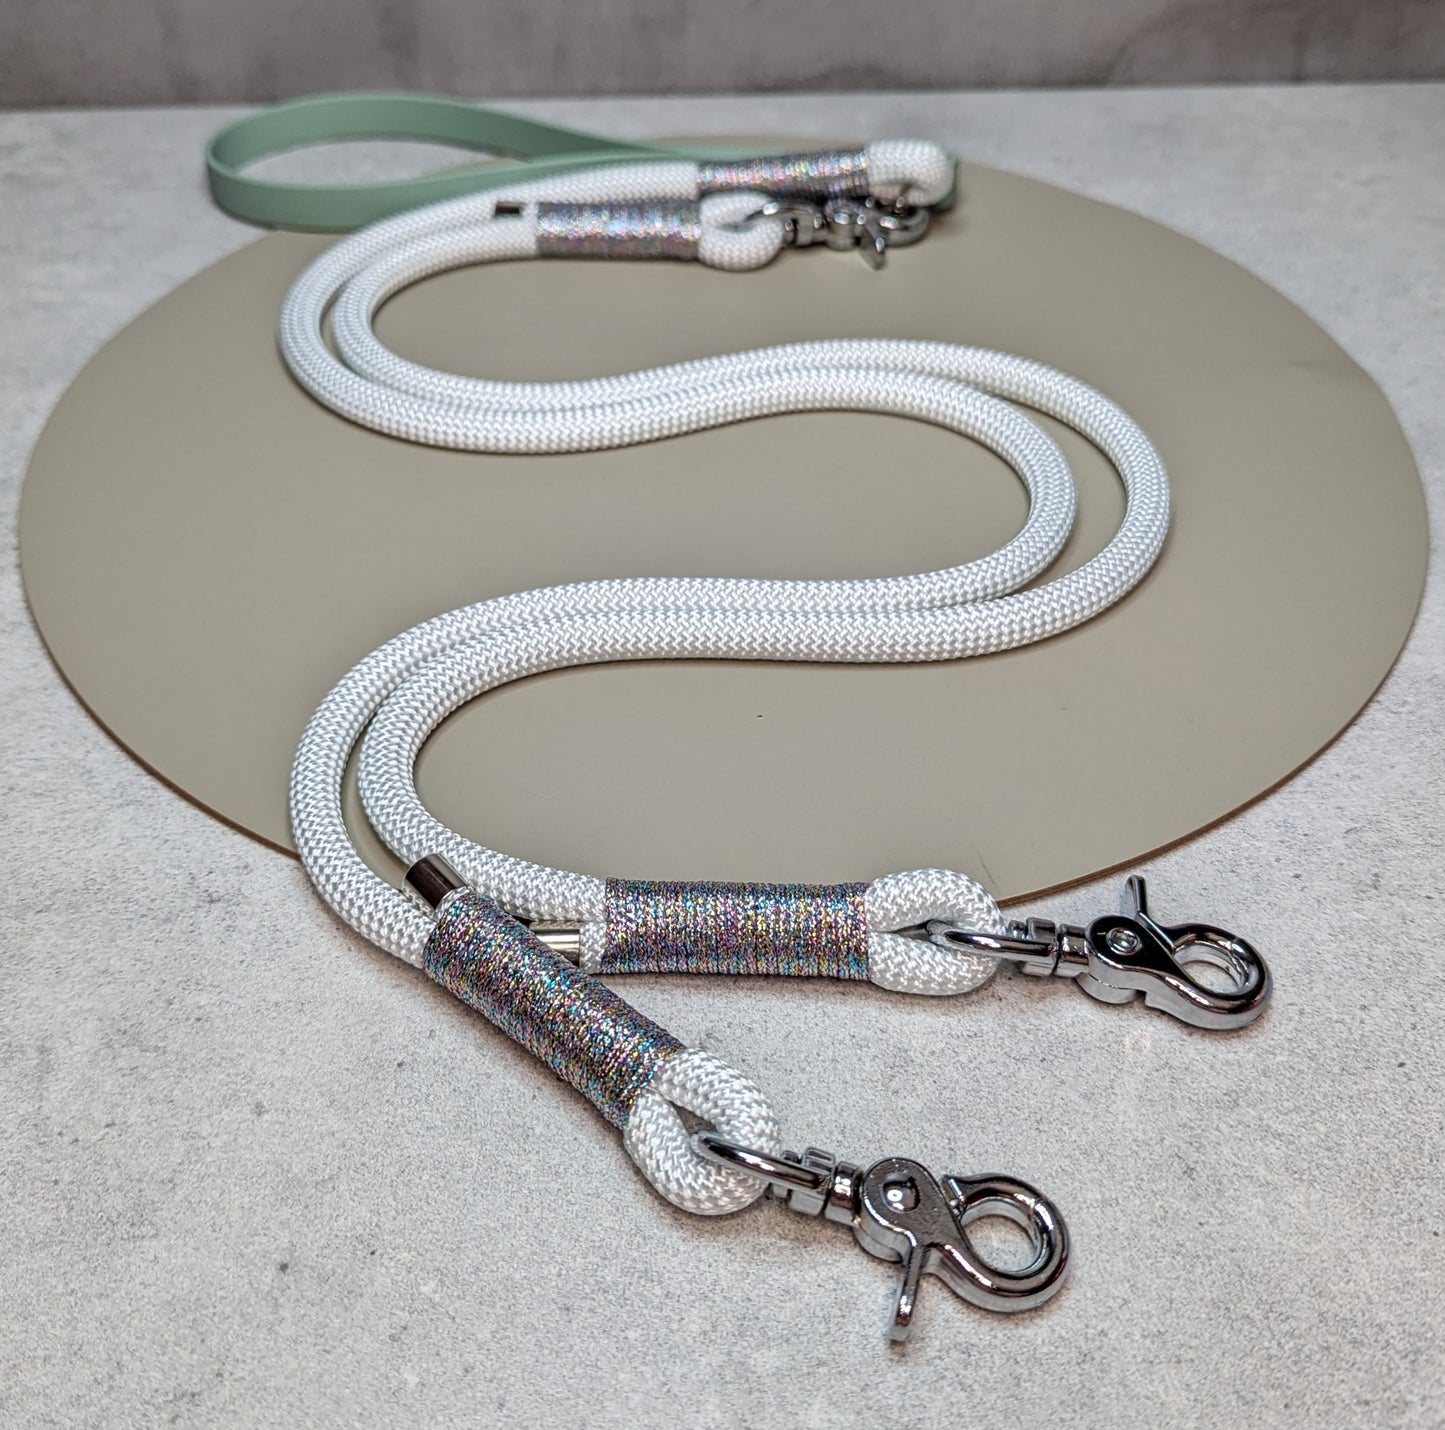 DUO - split rope lead with biothane handle - Design your own